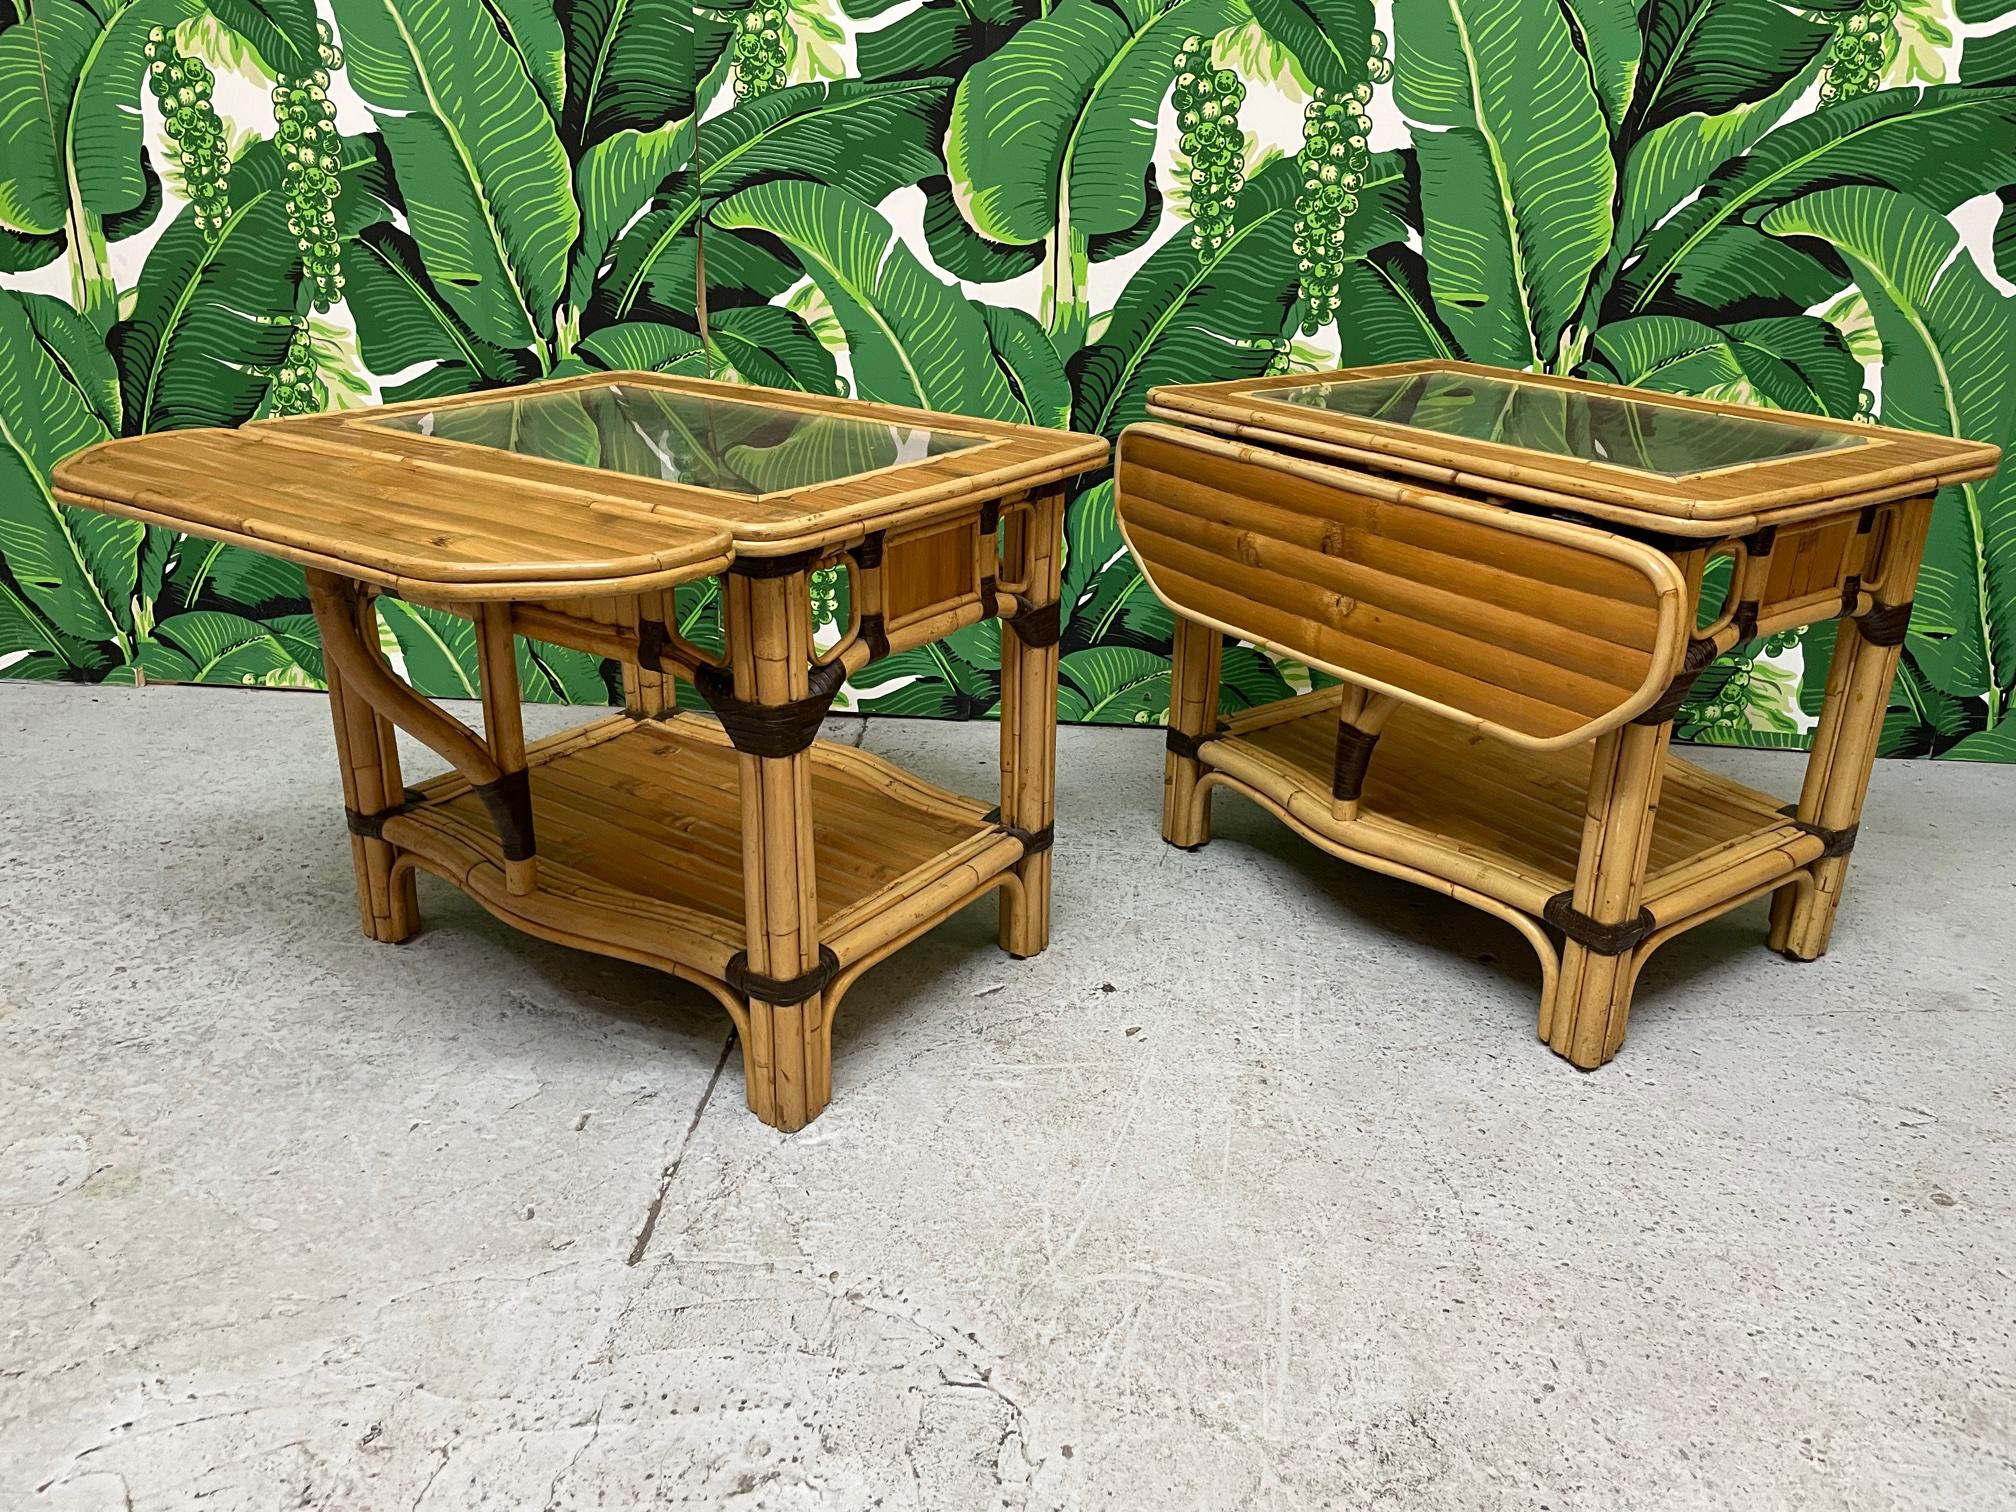 Pair of vintage split reed rattan side tables feature glass tops and unique drop leaf extensions on one side. Good condition with imperfections consistent with age. May exhibit scuffs, marks, or wear, see photos for details. Tops are plexiglass and